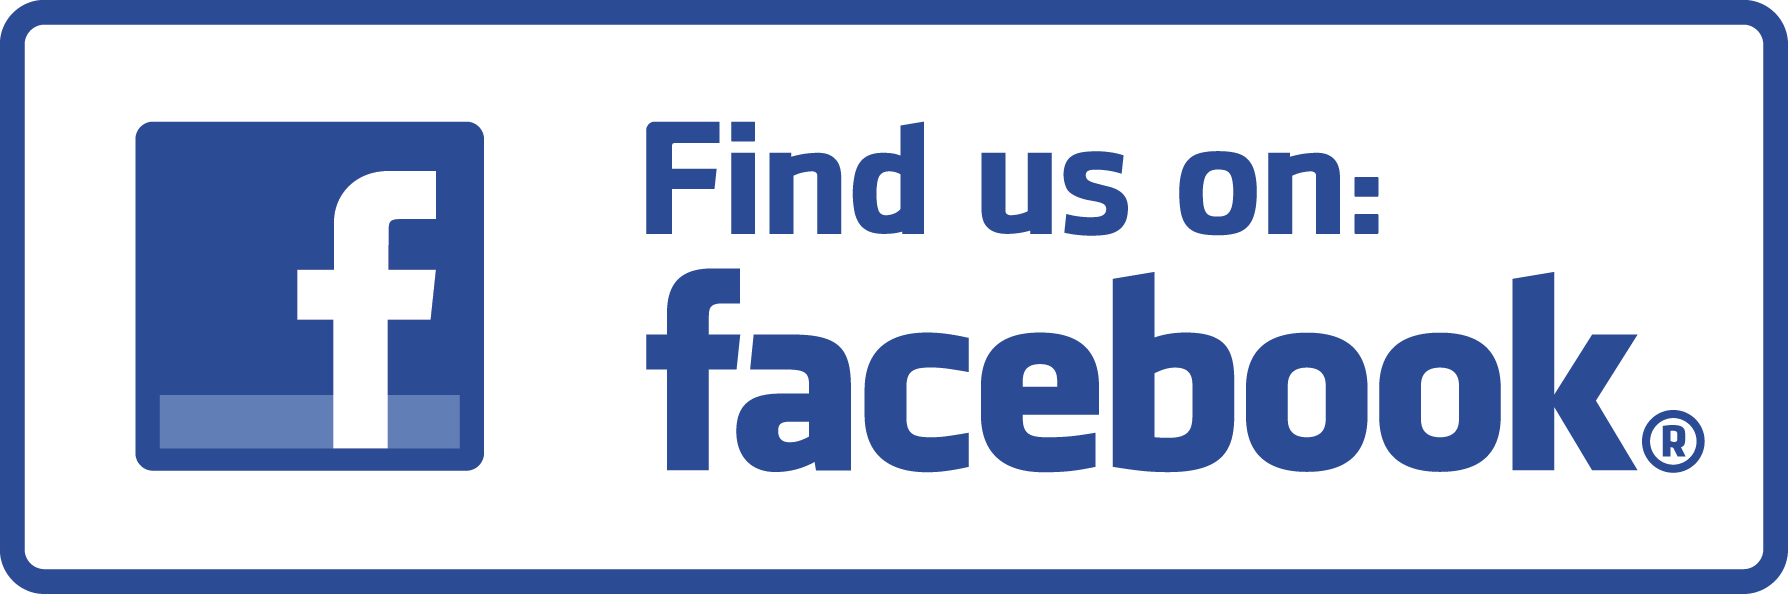 find us on fb png